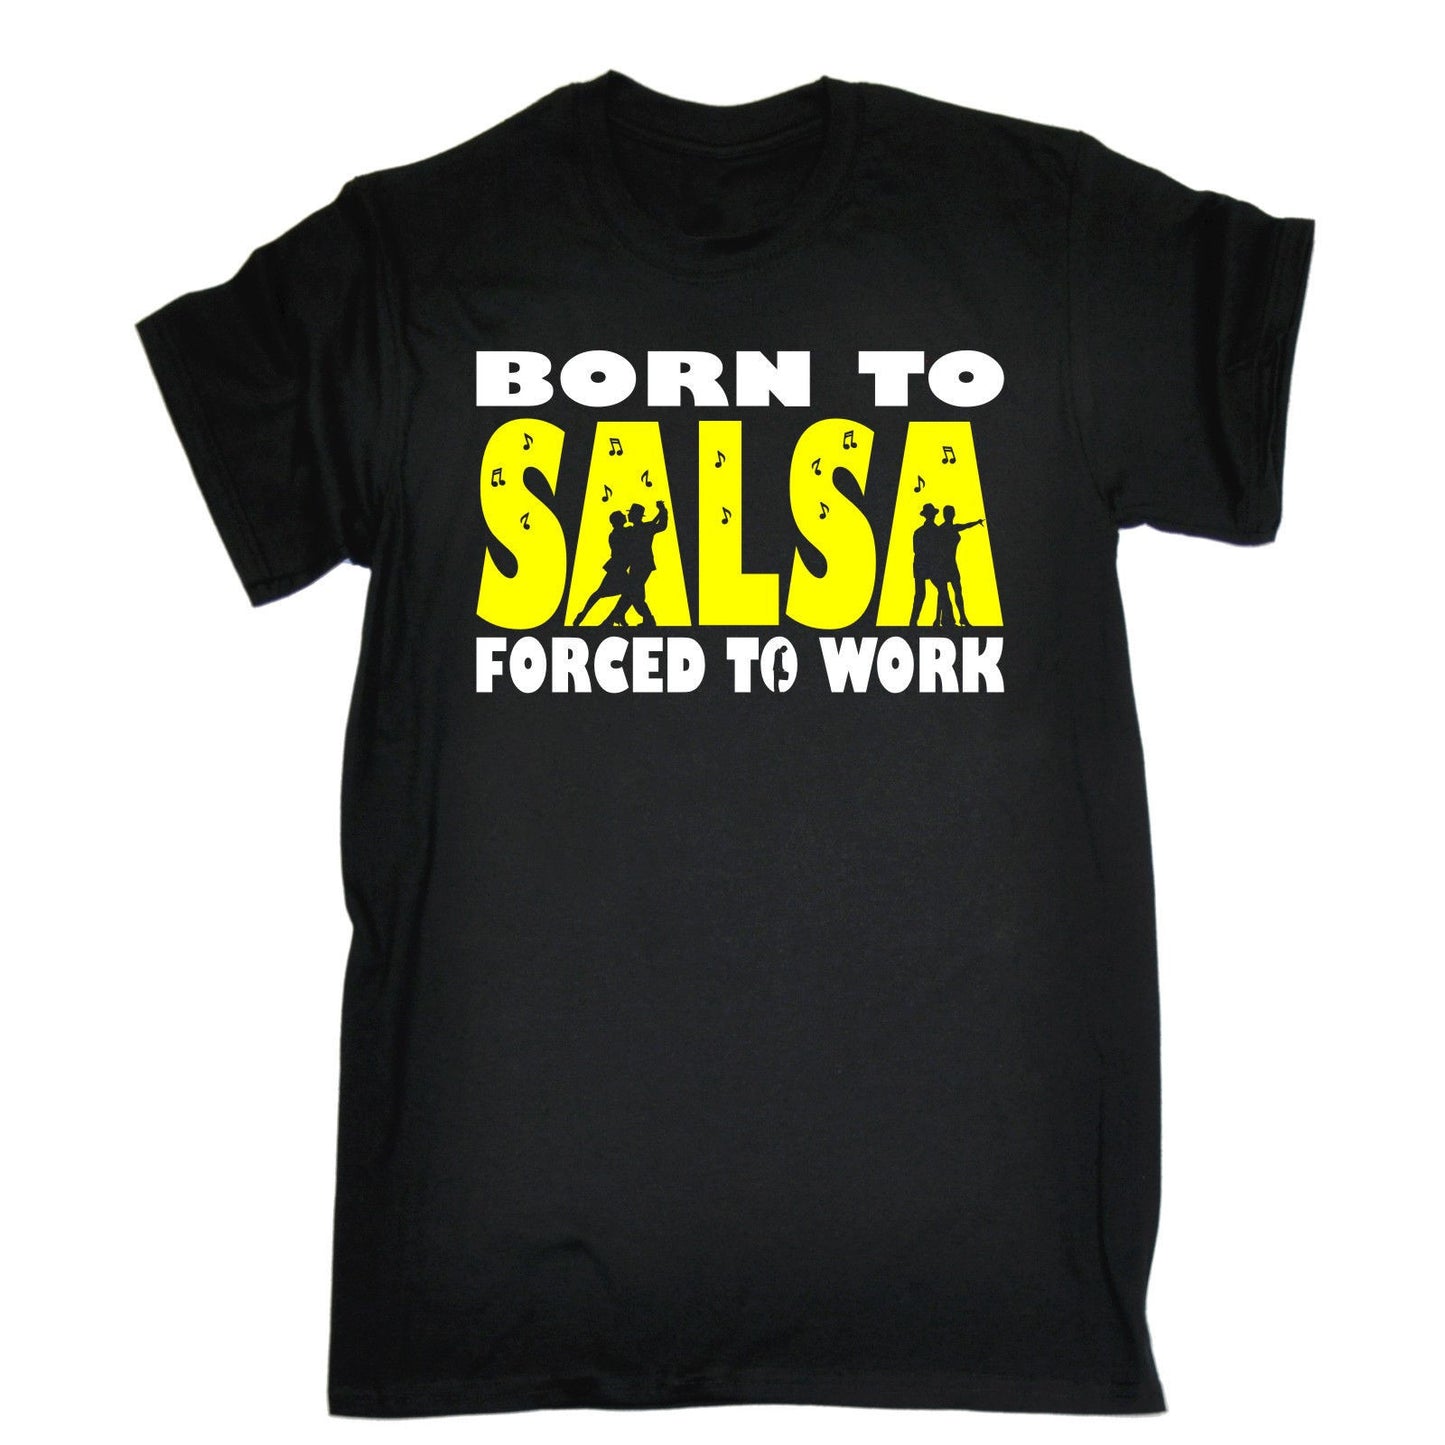 BORN TO SALSA FORCED TO WORK T-SHIRT Tee Dance Dancing Funny Birthday Gift 123t Summer Style Hip Hop Men T Shirt Tops - World Salsa Championships